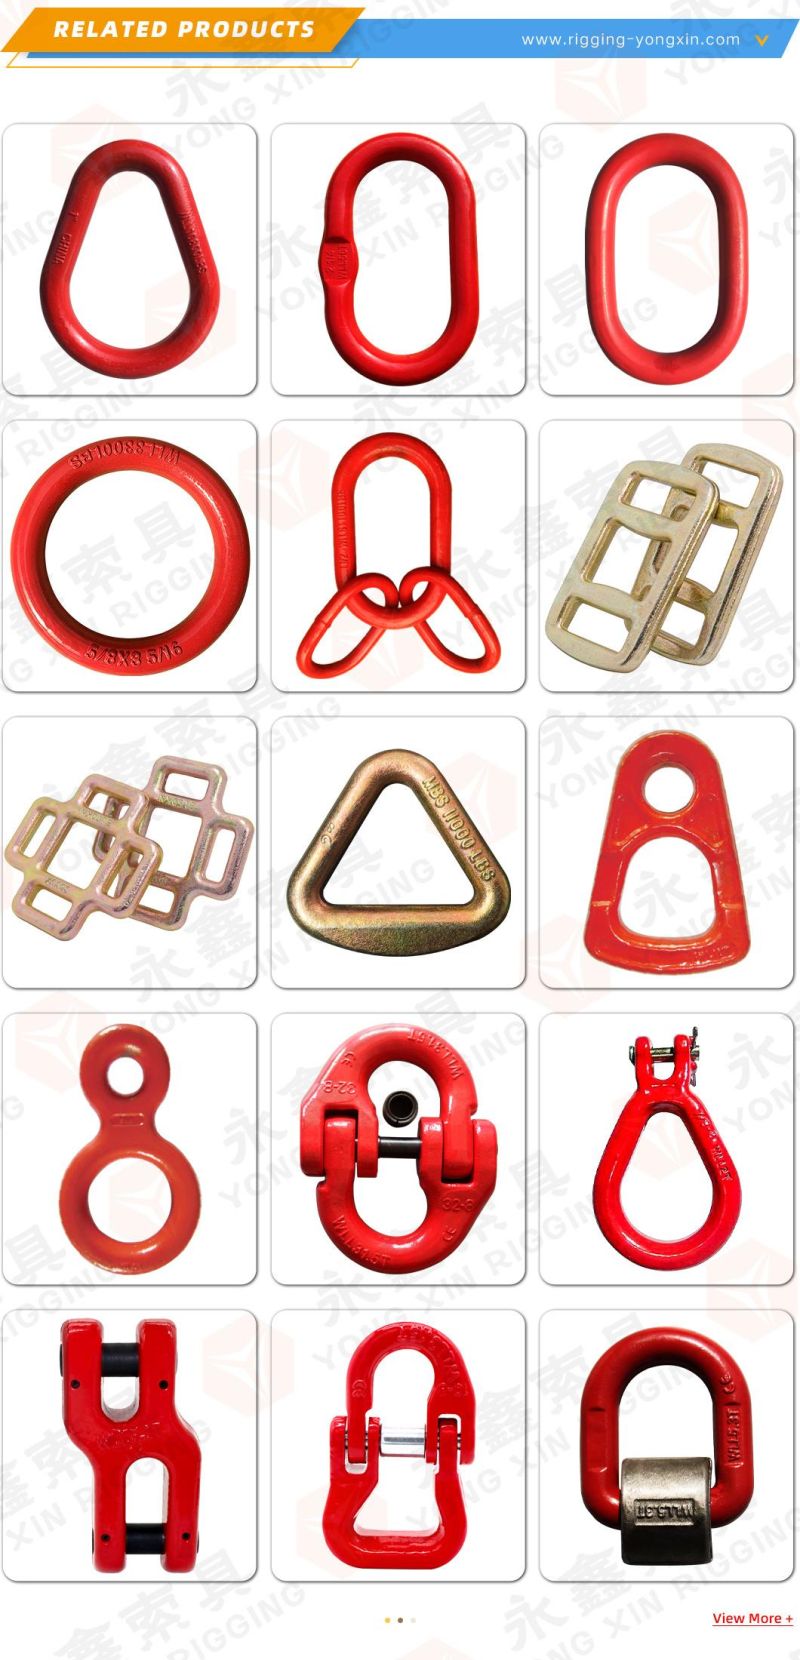 European Type G80 Anchor Chain Coupling Hardware Rigging Forge Steel Connecting Link